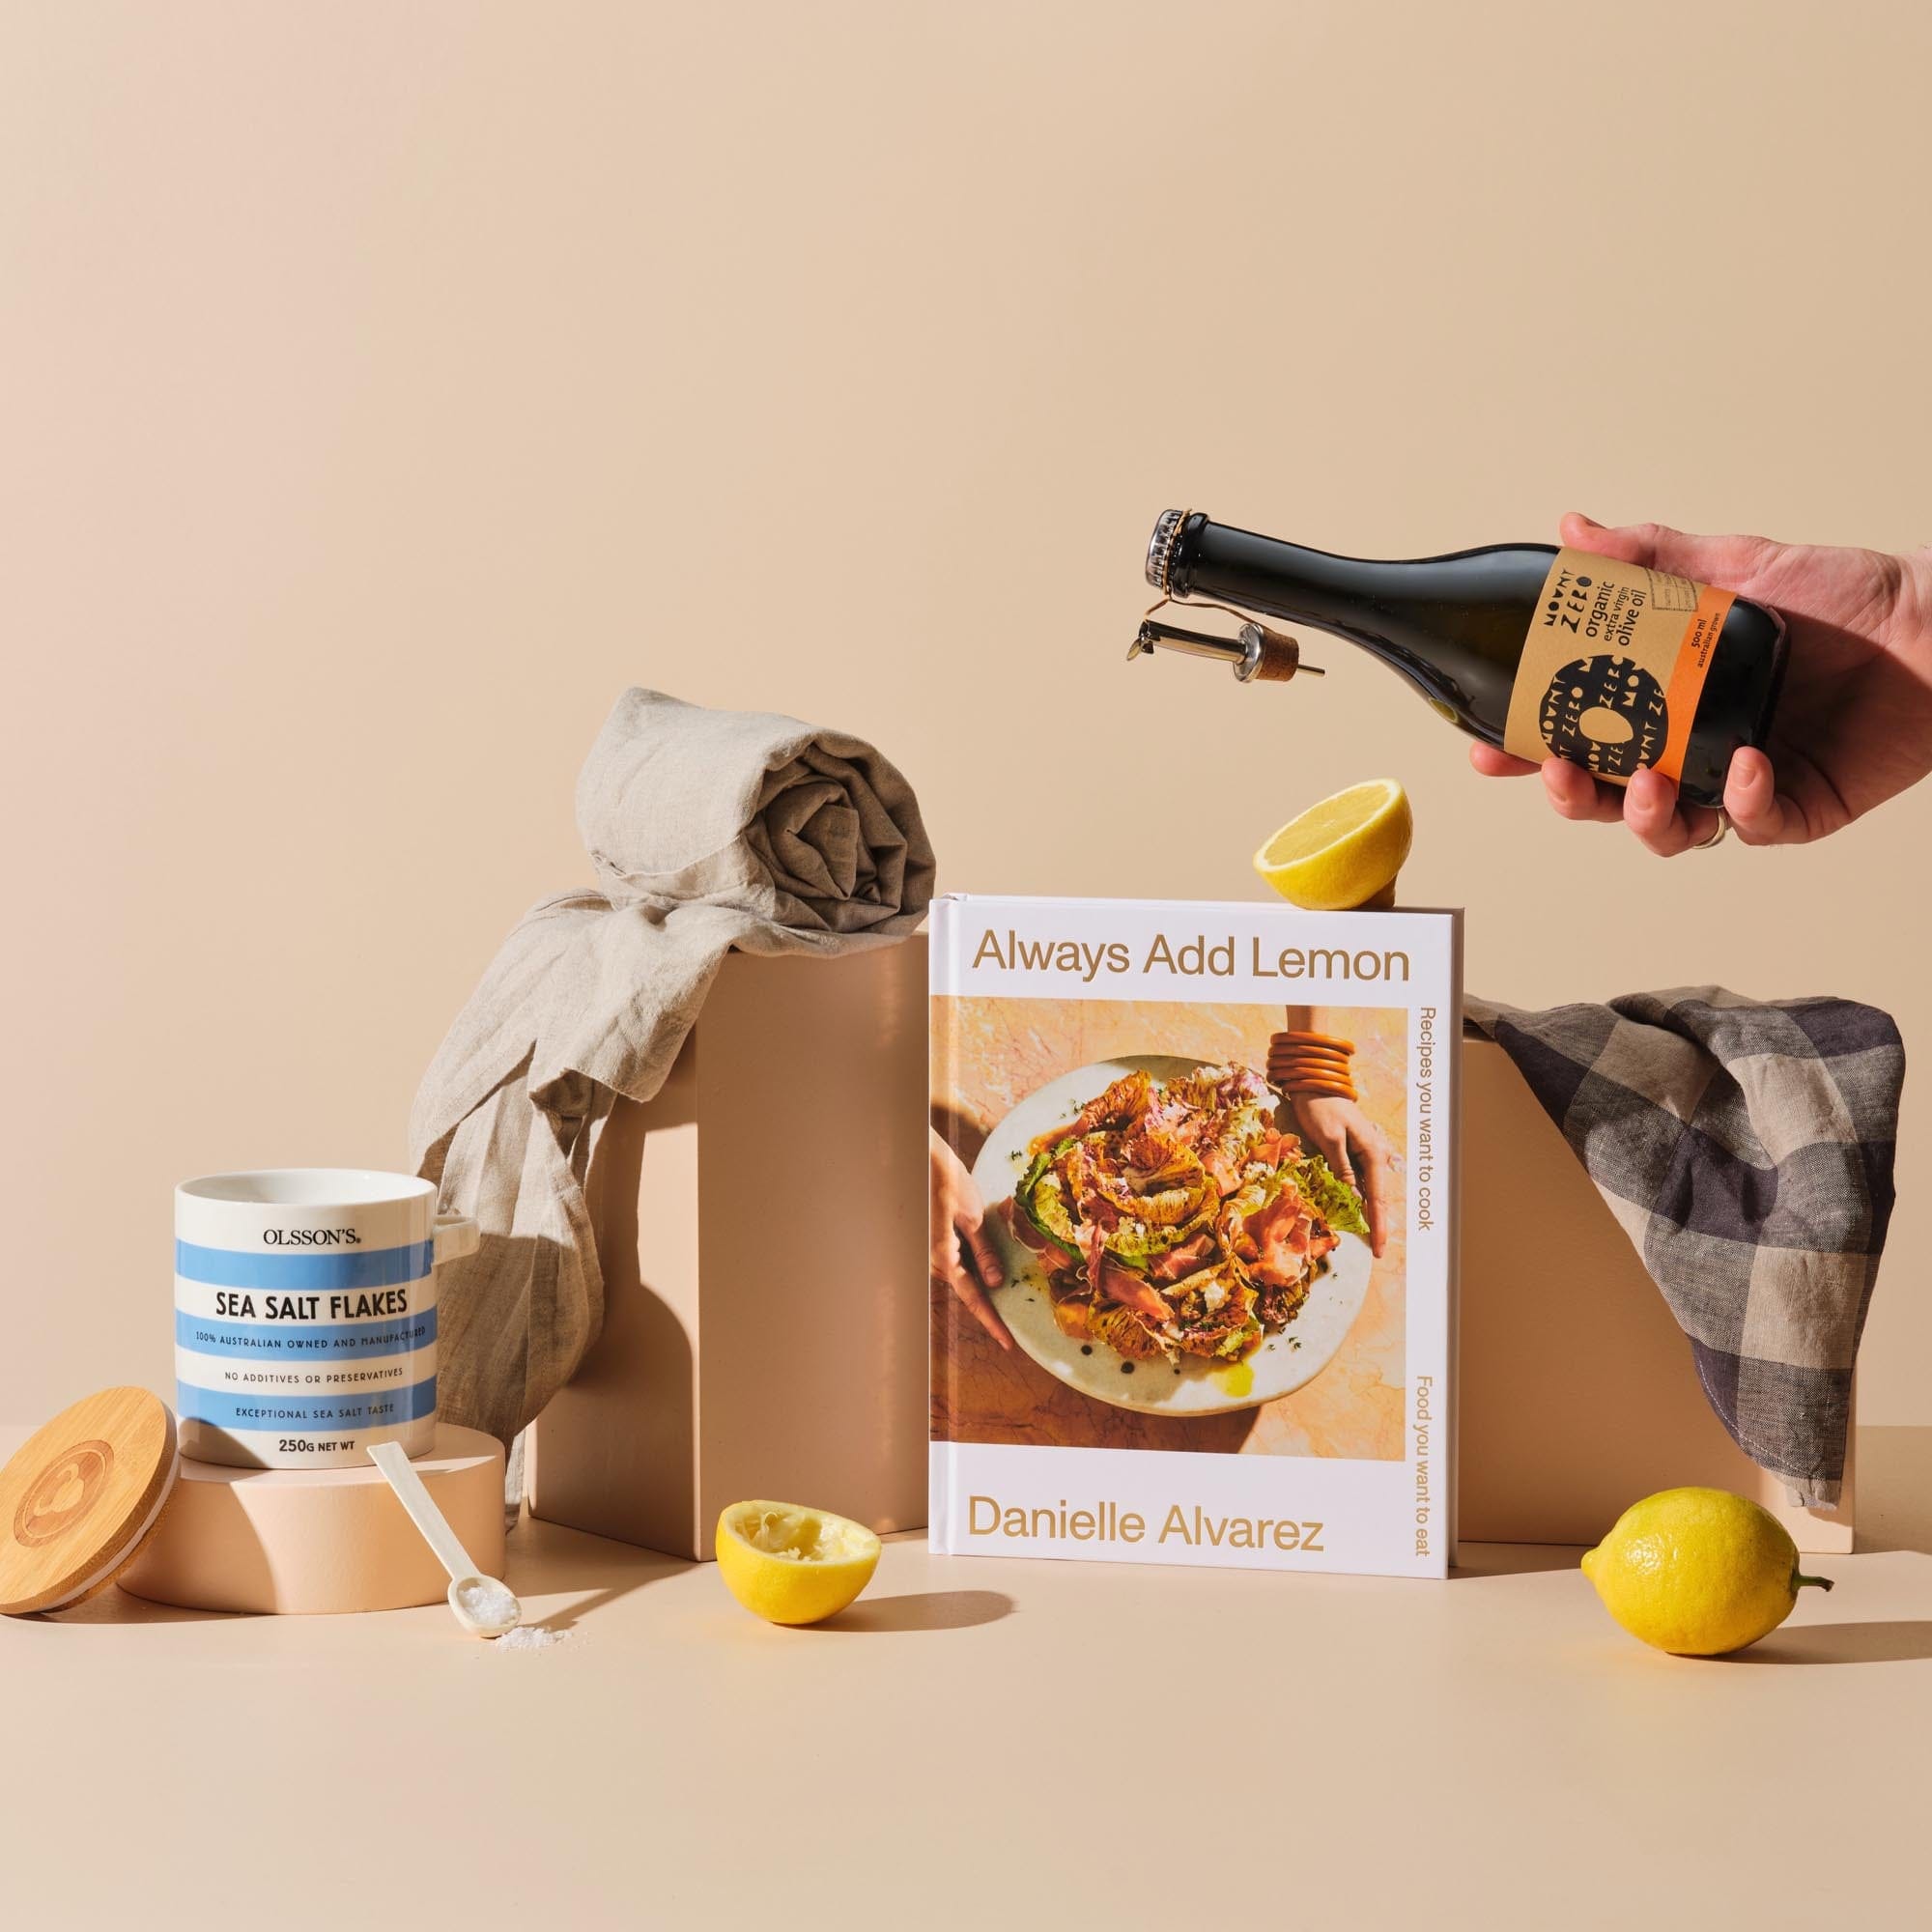 This is the Larder Love gift bundle from Handsel. Included in this image is Always Add Lemon, Olive oil, Sea salt flakes and an Apron/Tea towel